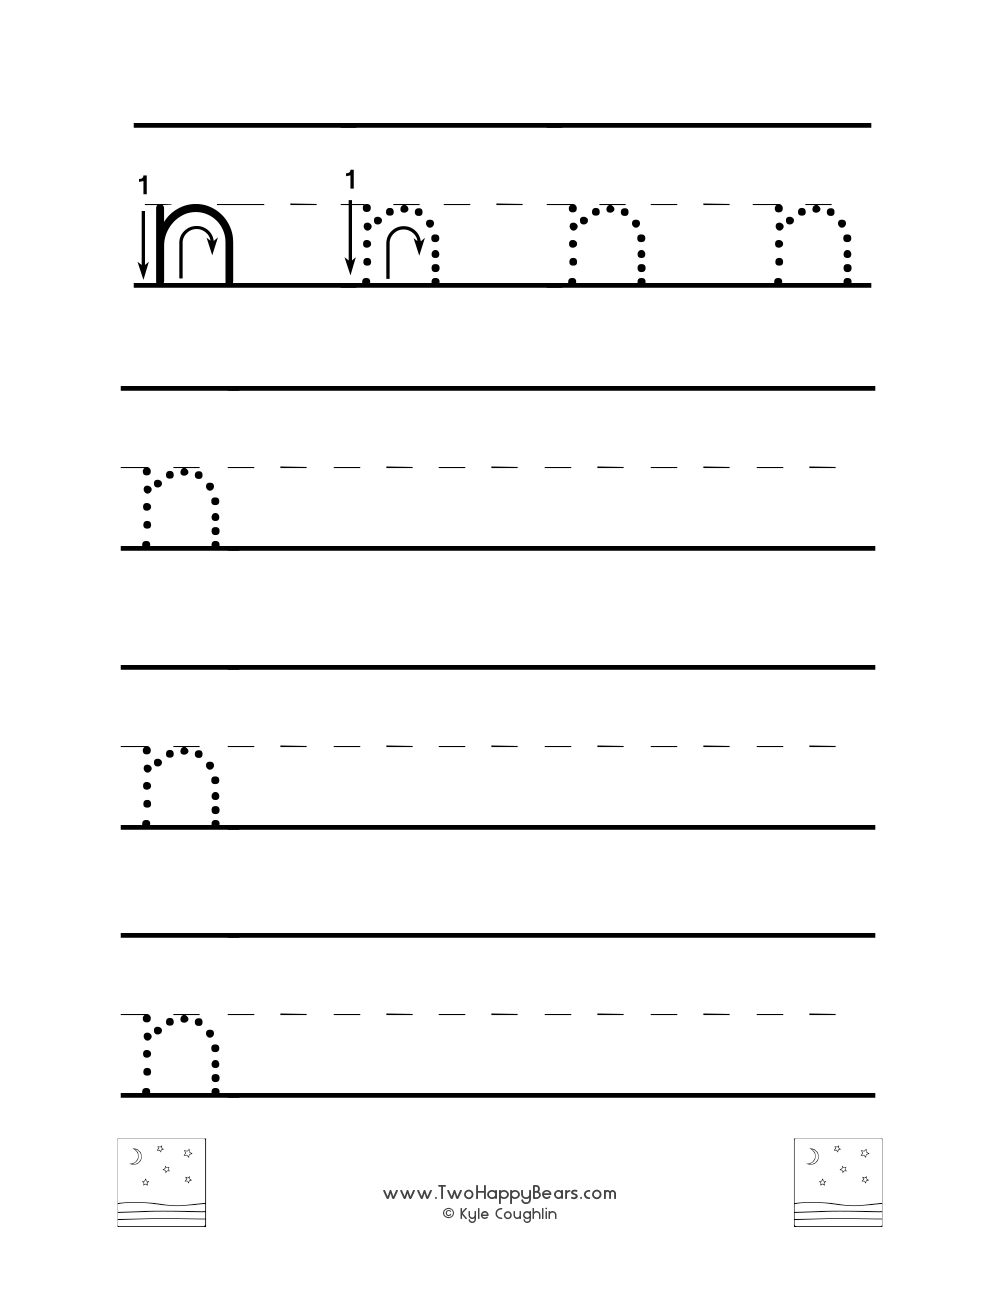 Lowercase letter N worksheet for tracing and drawing